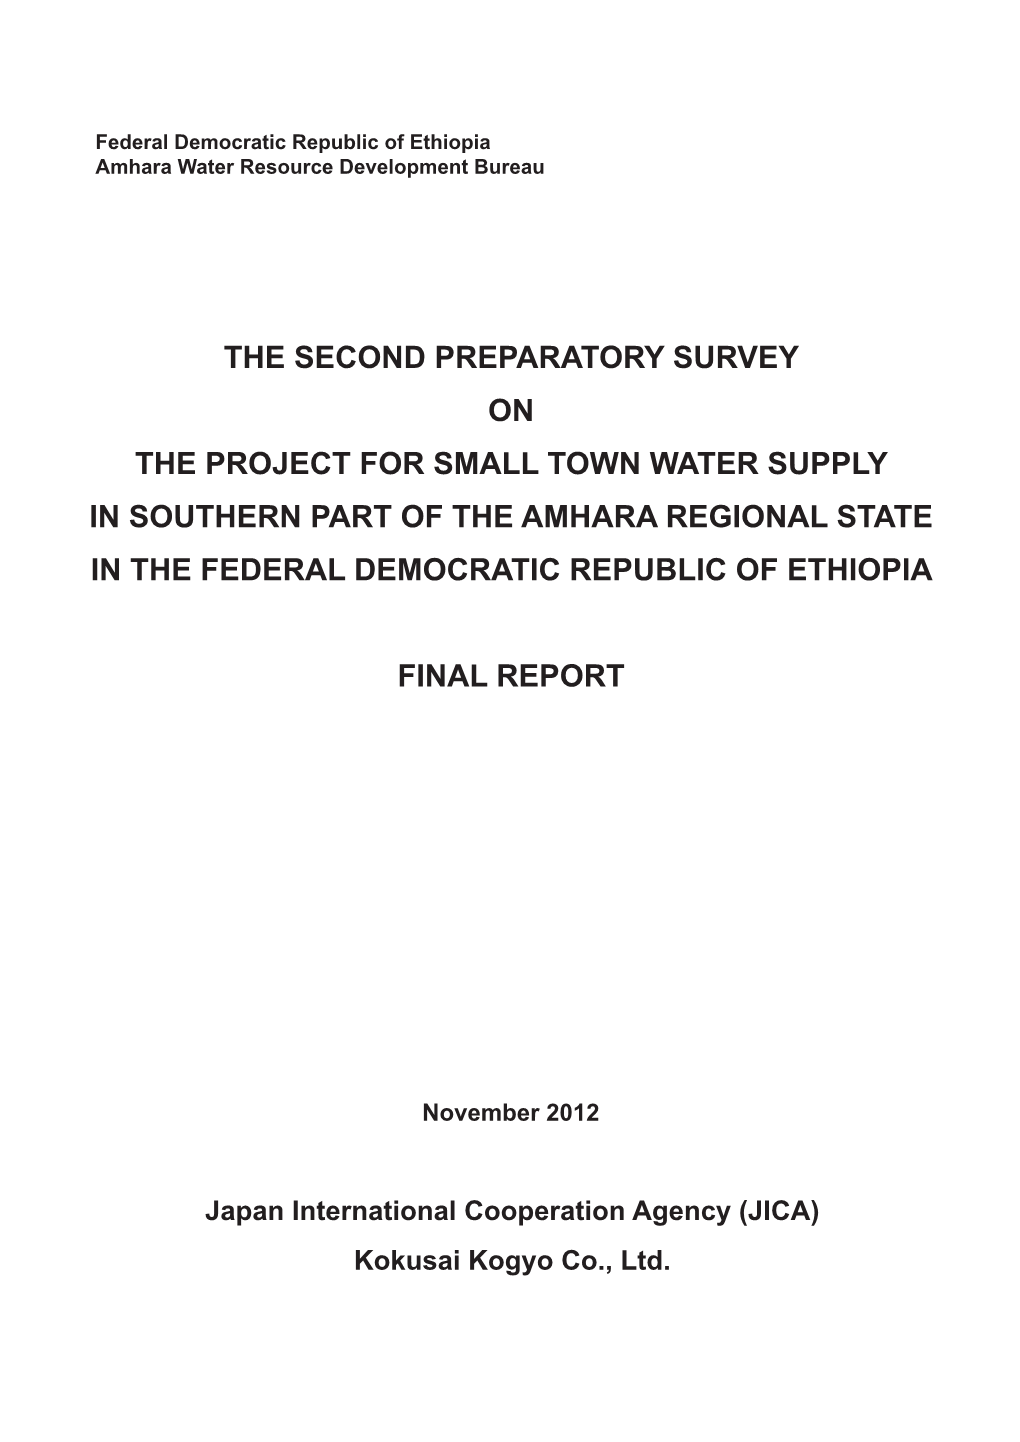 The Second Preparatory Survey on the Project for Small Town Water Supply in Southern Part of the Amhara Regional State in the Federal Democratic Republic of Ethiopia